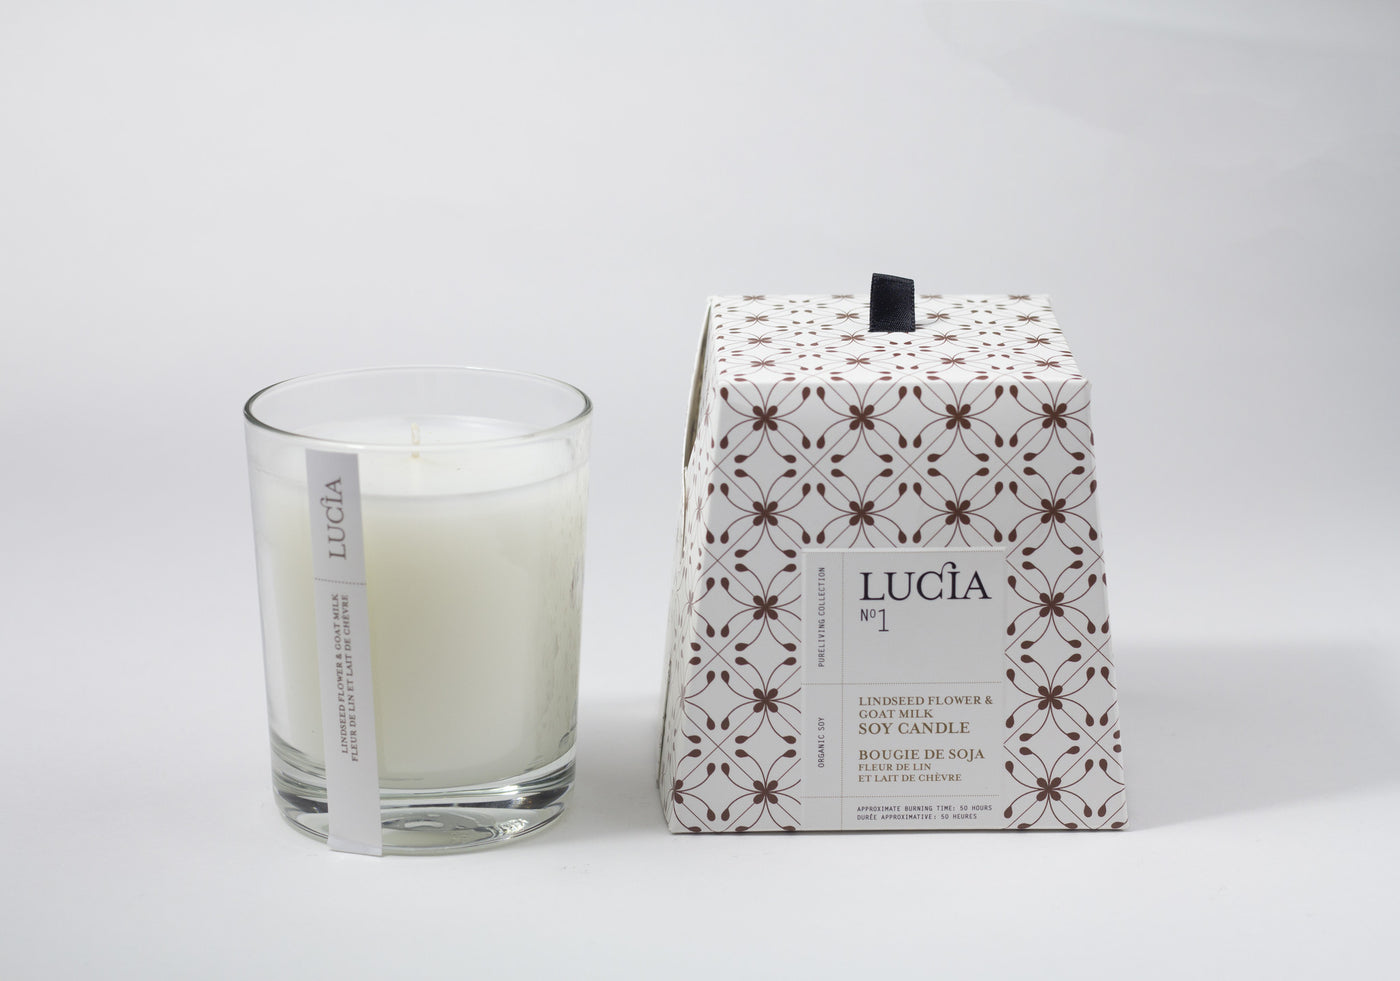 LUCIA GOAT MILK CANDLE